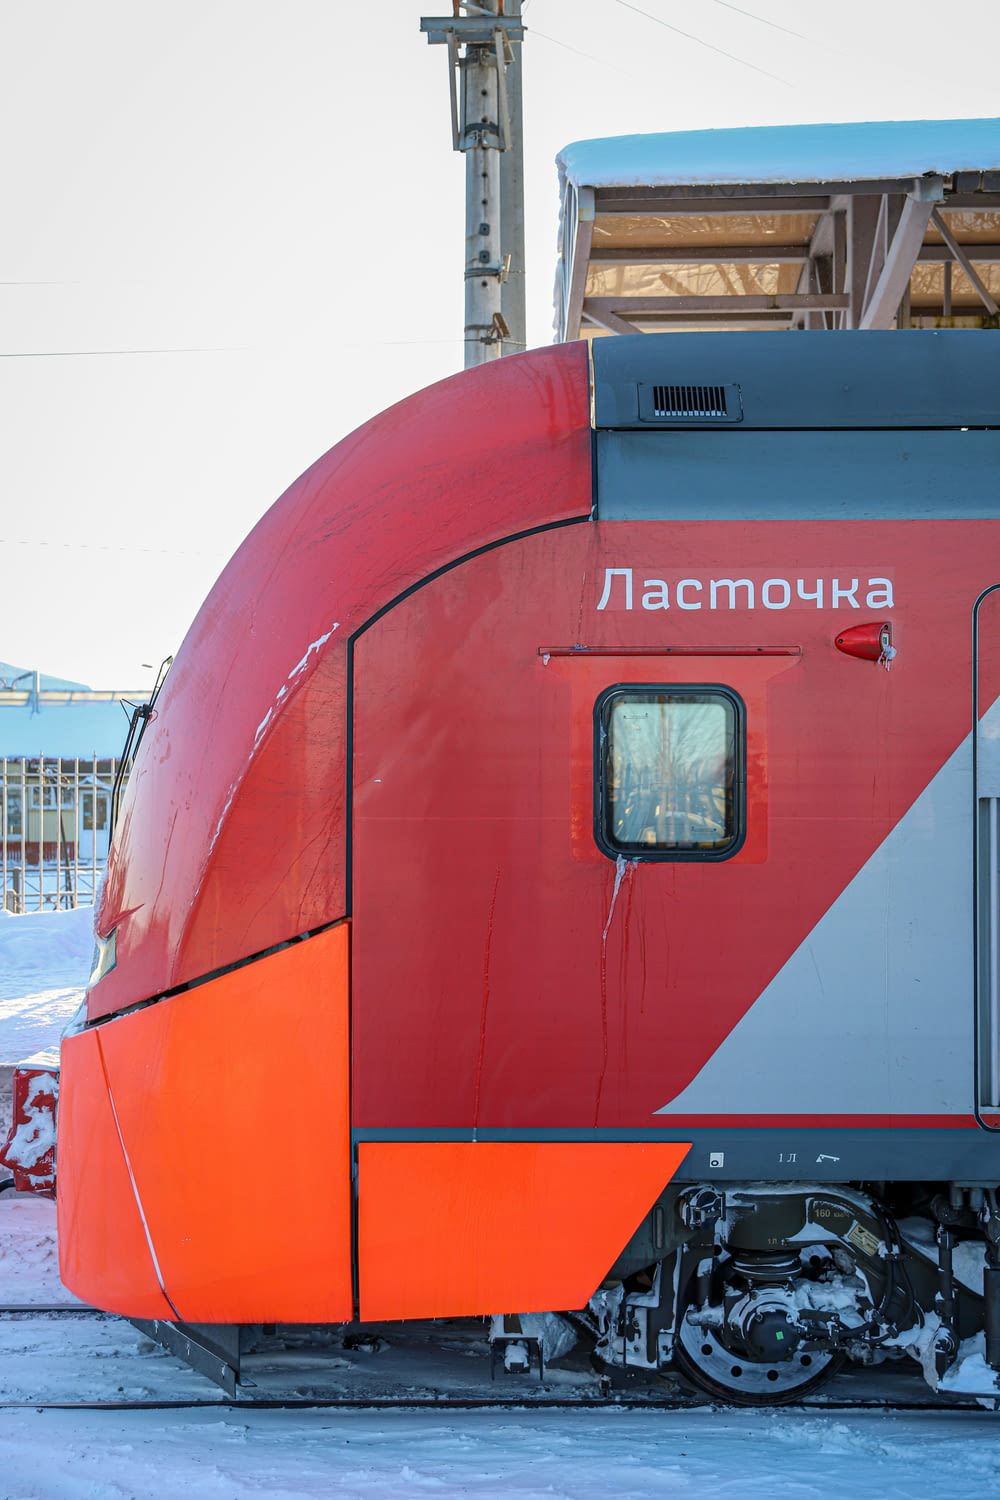 a red and grey train sitting on the tracks